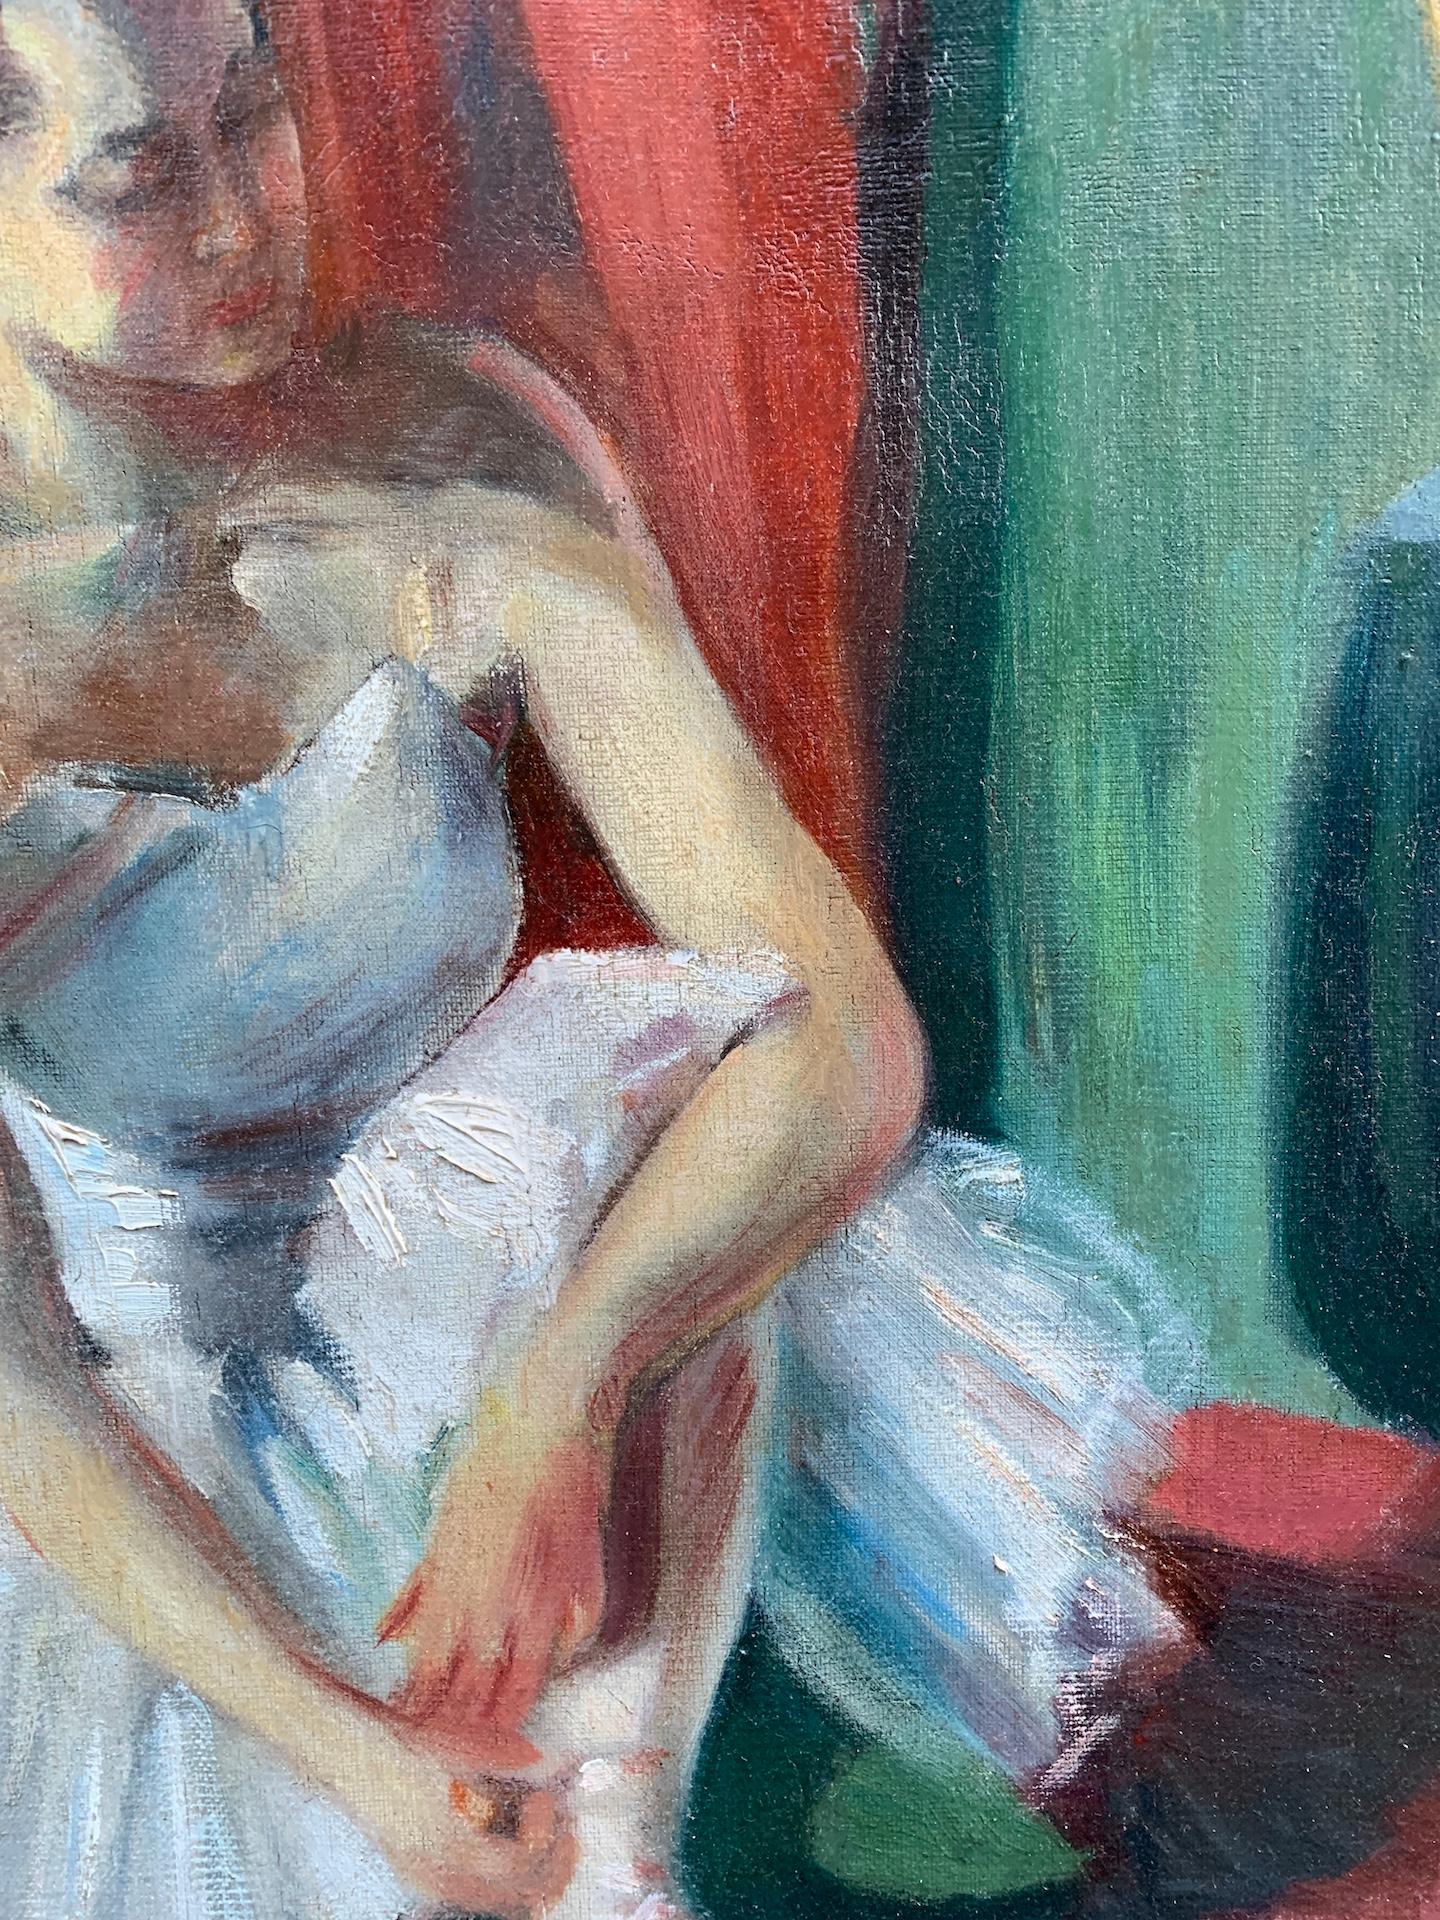 Very Impressive French Impressionist figure study of a Ballerina seated in an interior.

A very decorative and very desirable oil on canvas dating from the early 1900's

The painting has a great feeling and lights up any room with its well balanced